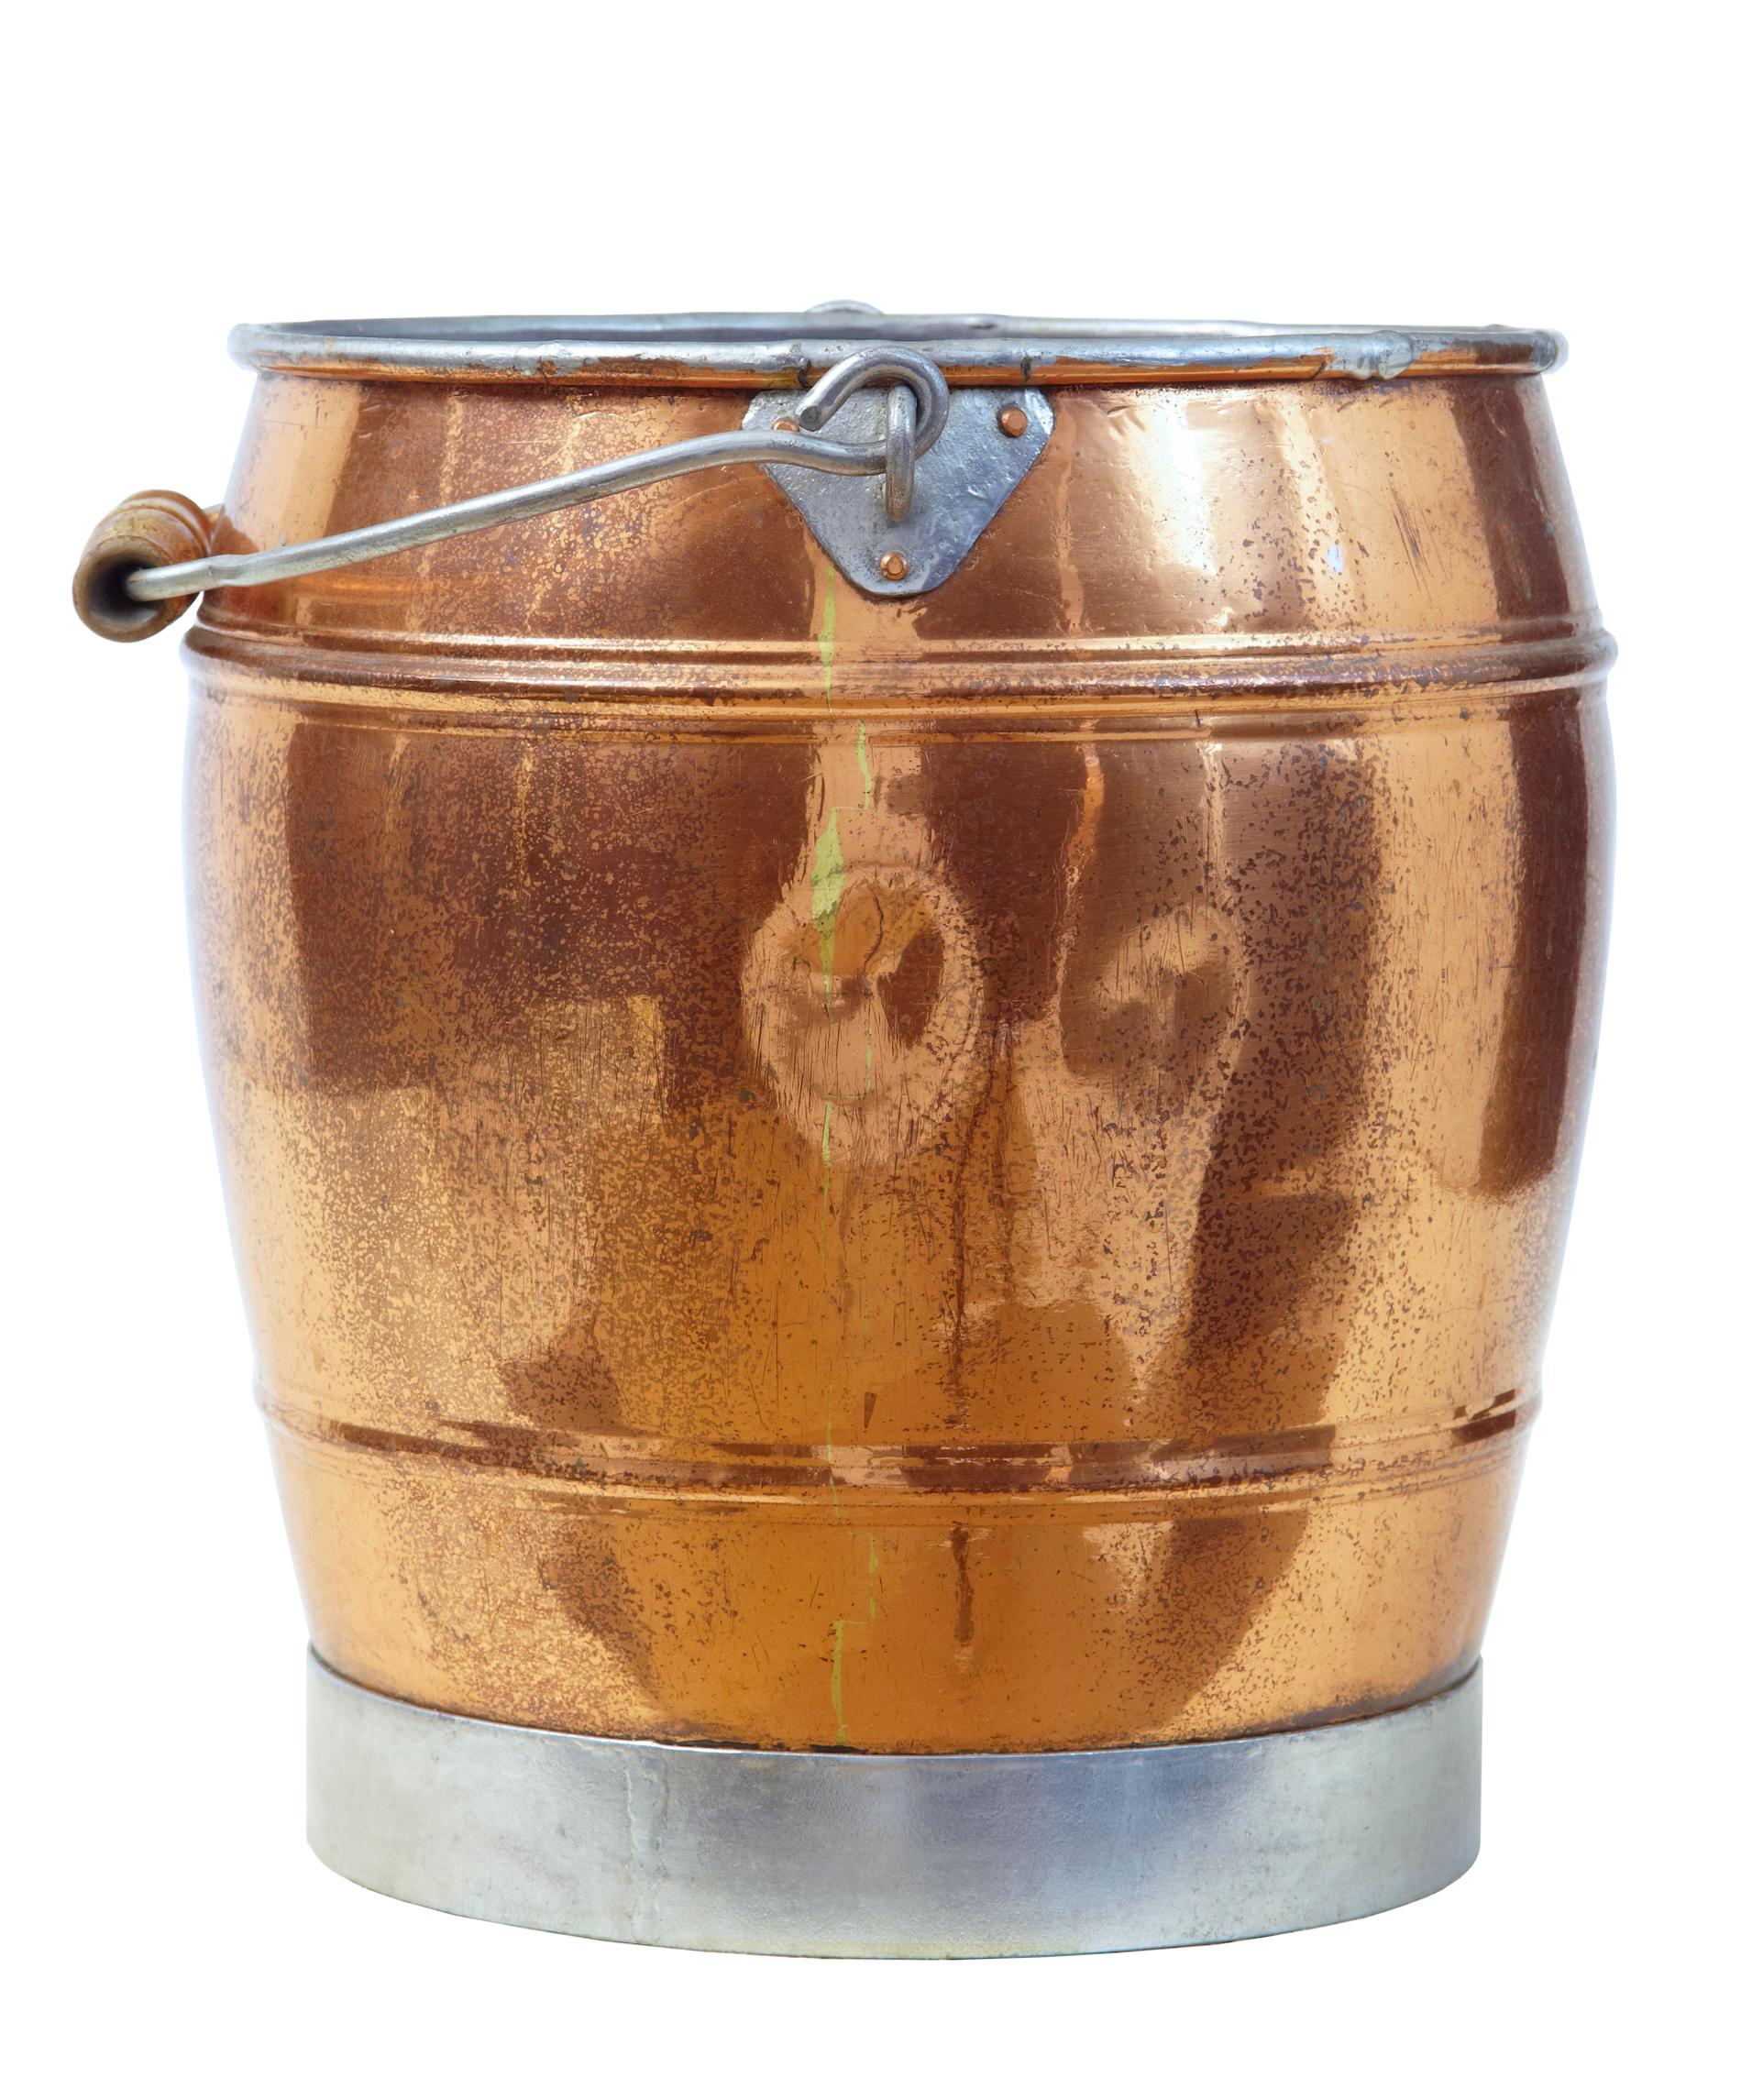 Arts & Crafts Scandinavian copper bucket circa 1890.

Fine quality keg shaped copper bucket. Steel rim base and handle with turned pine handle. Ideal for use as a log bin or quirky waste paper basket.

Expected surface marks and fading.